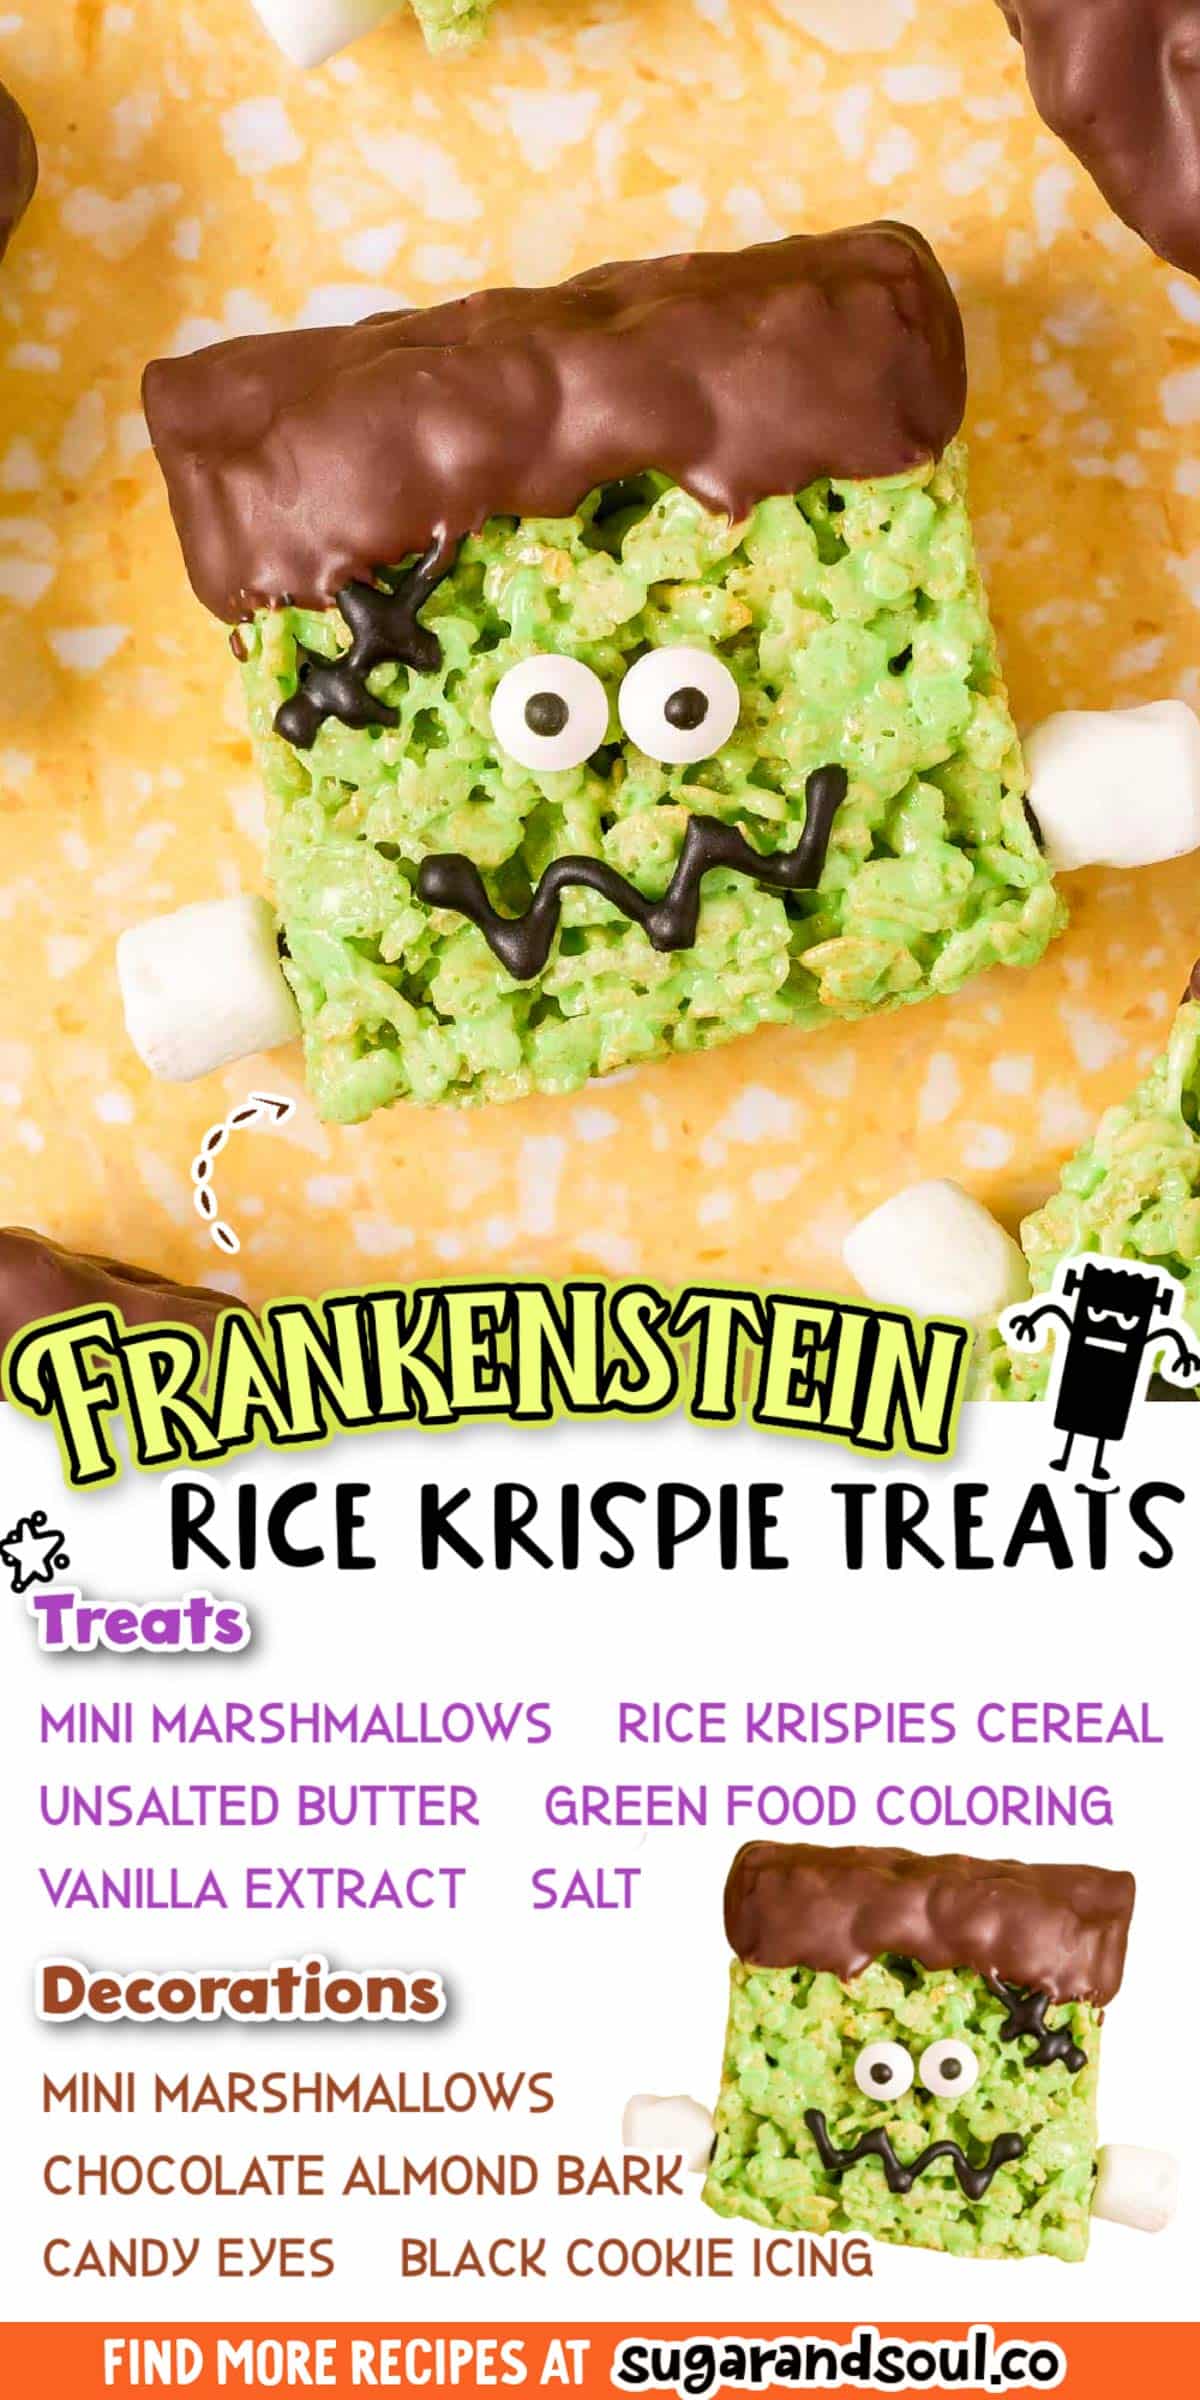 These Frankenstein Rice Krispie Treats are a chewy, sweet Halloween treat that kids will go crazy for! Takes just 30 minutes to prep! via @sugarandsoulco